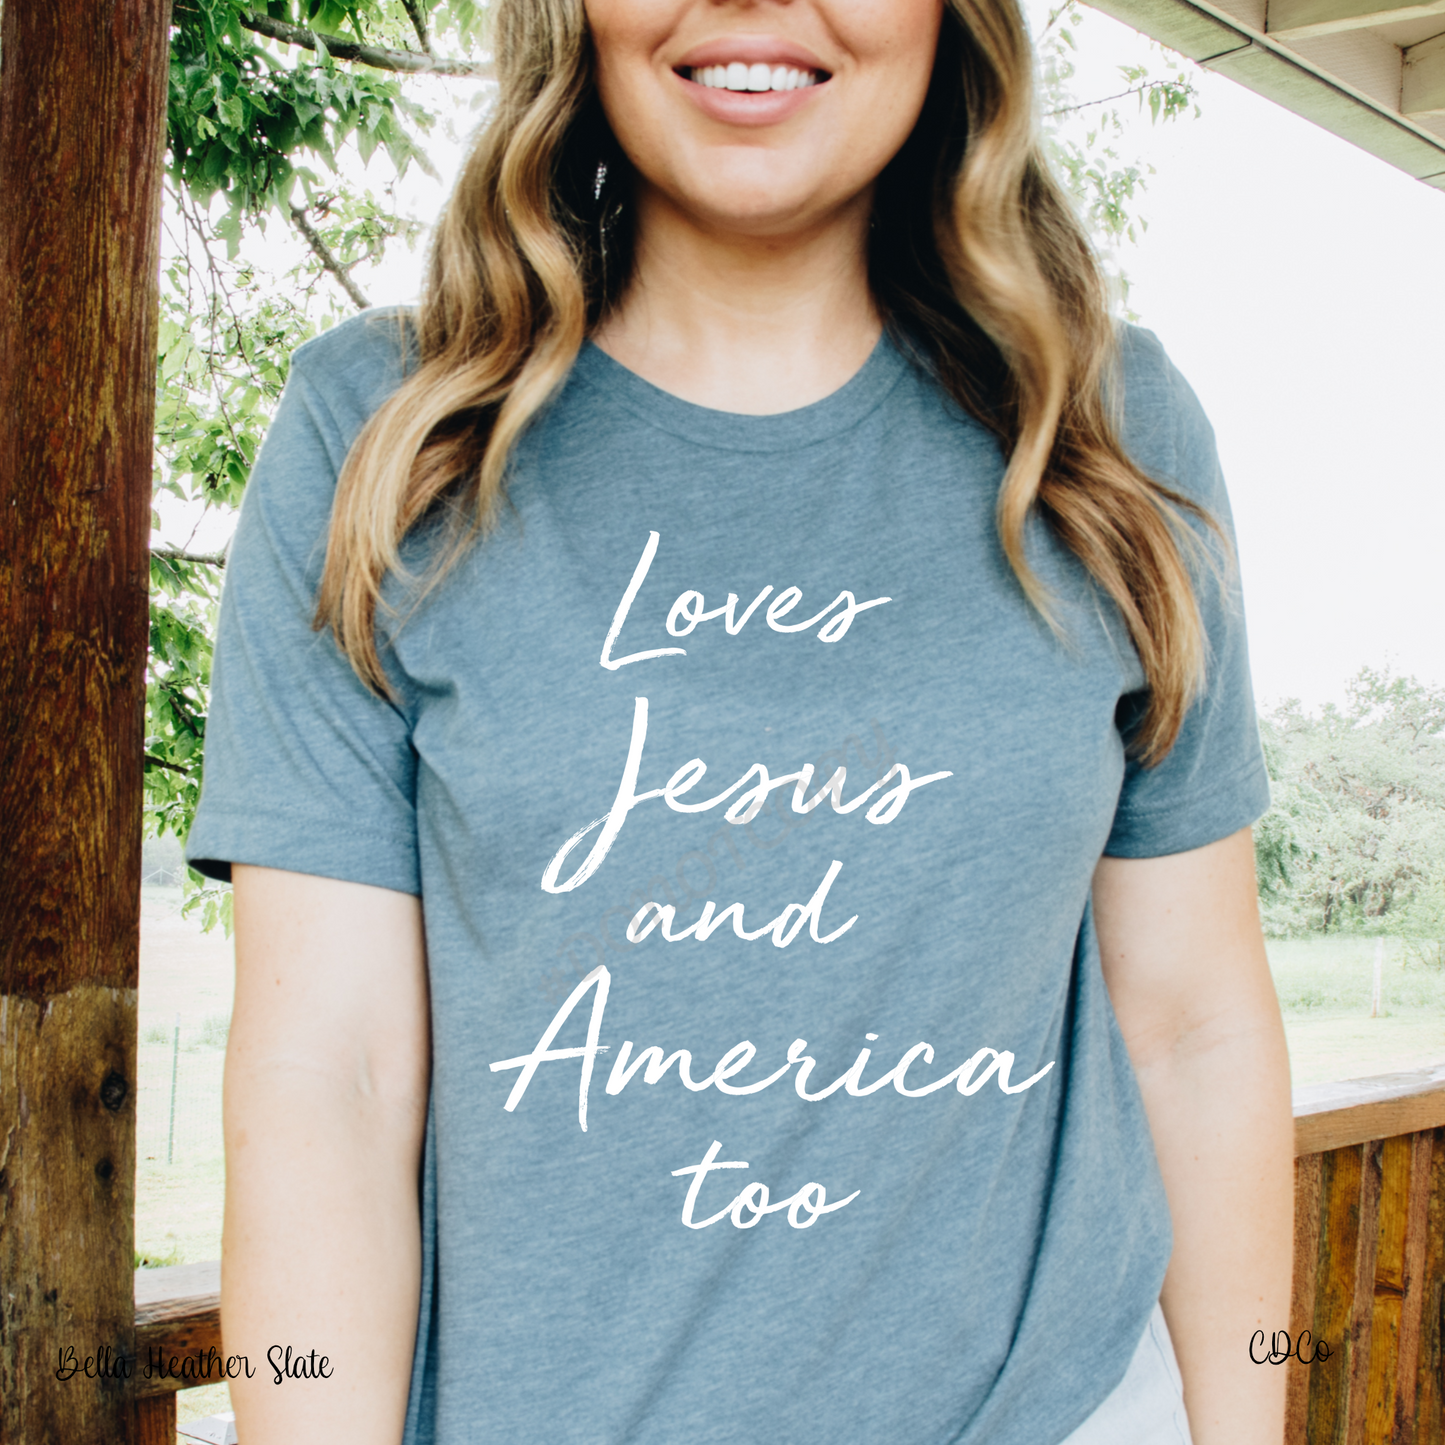 Loves Jesus and America Too (325°)